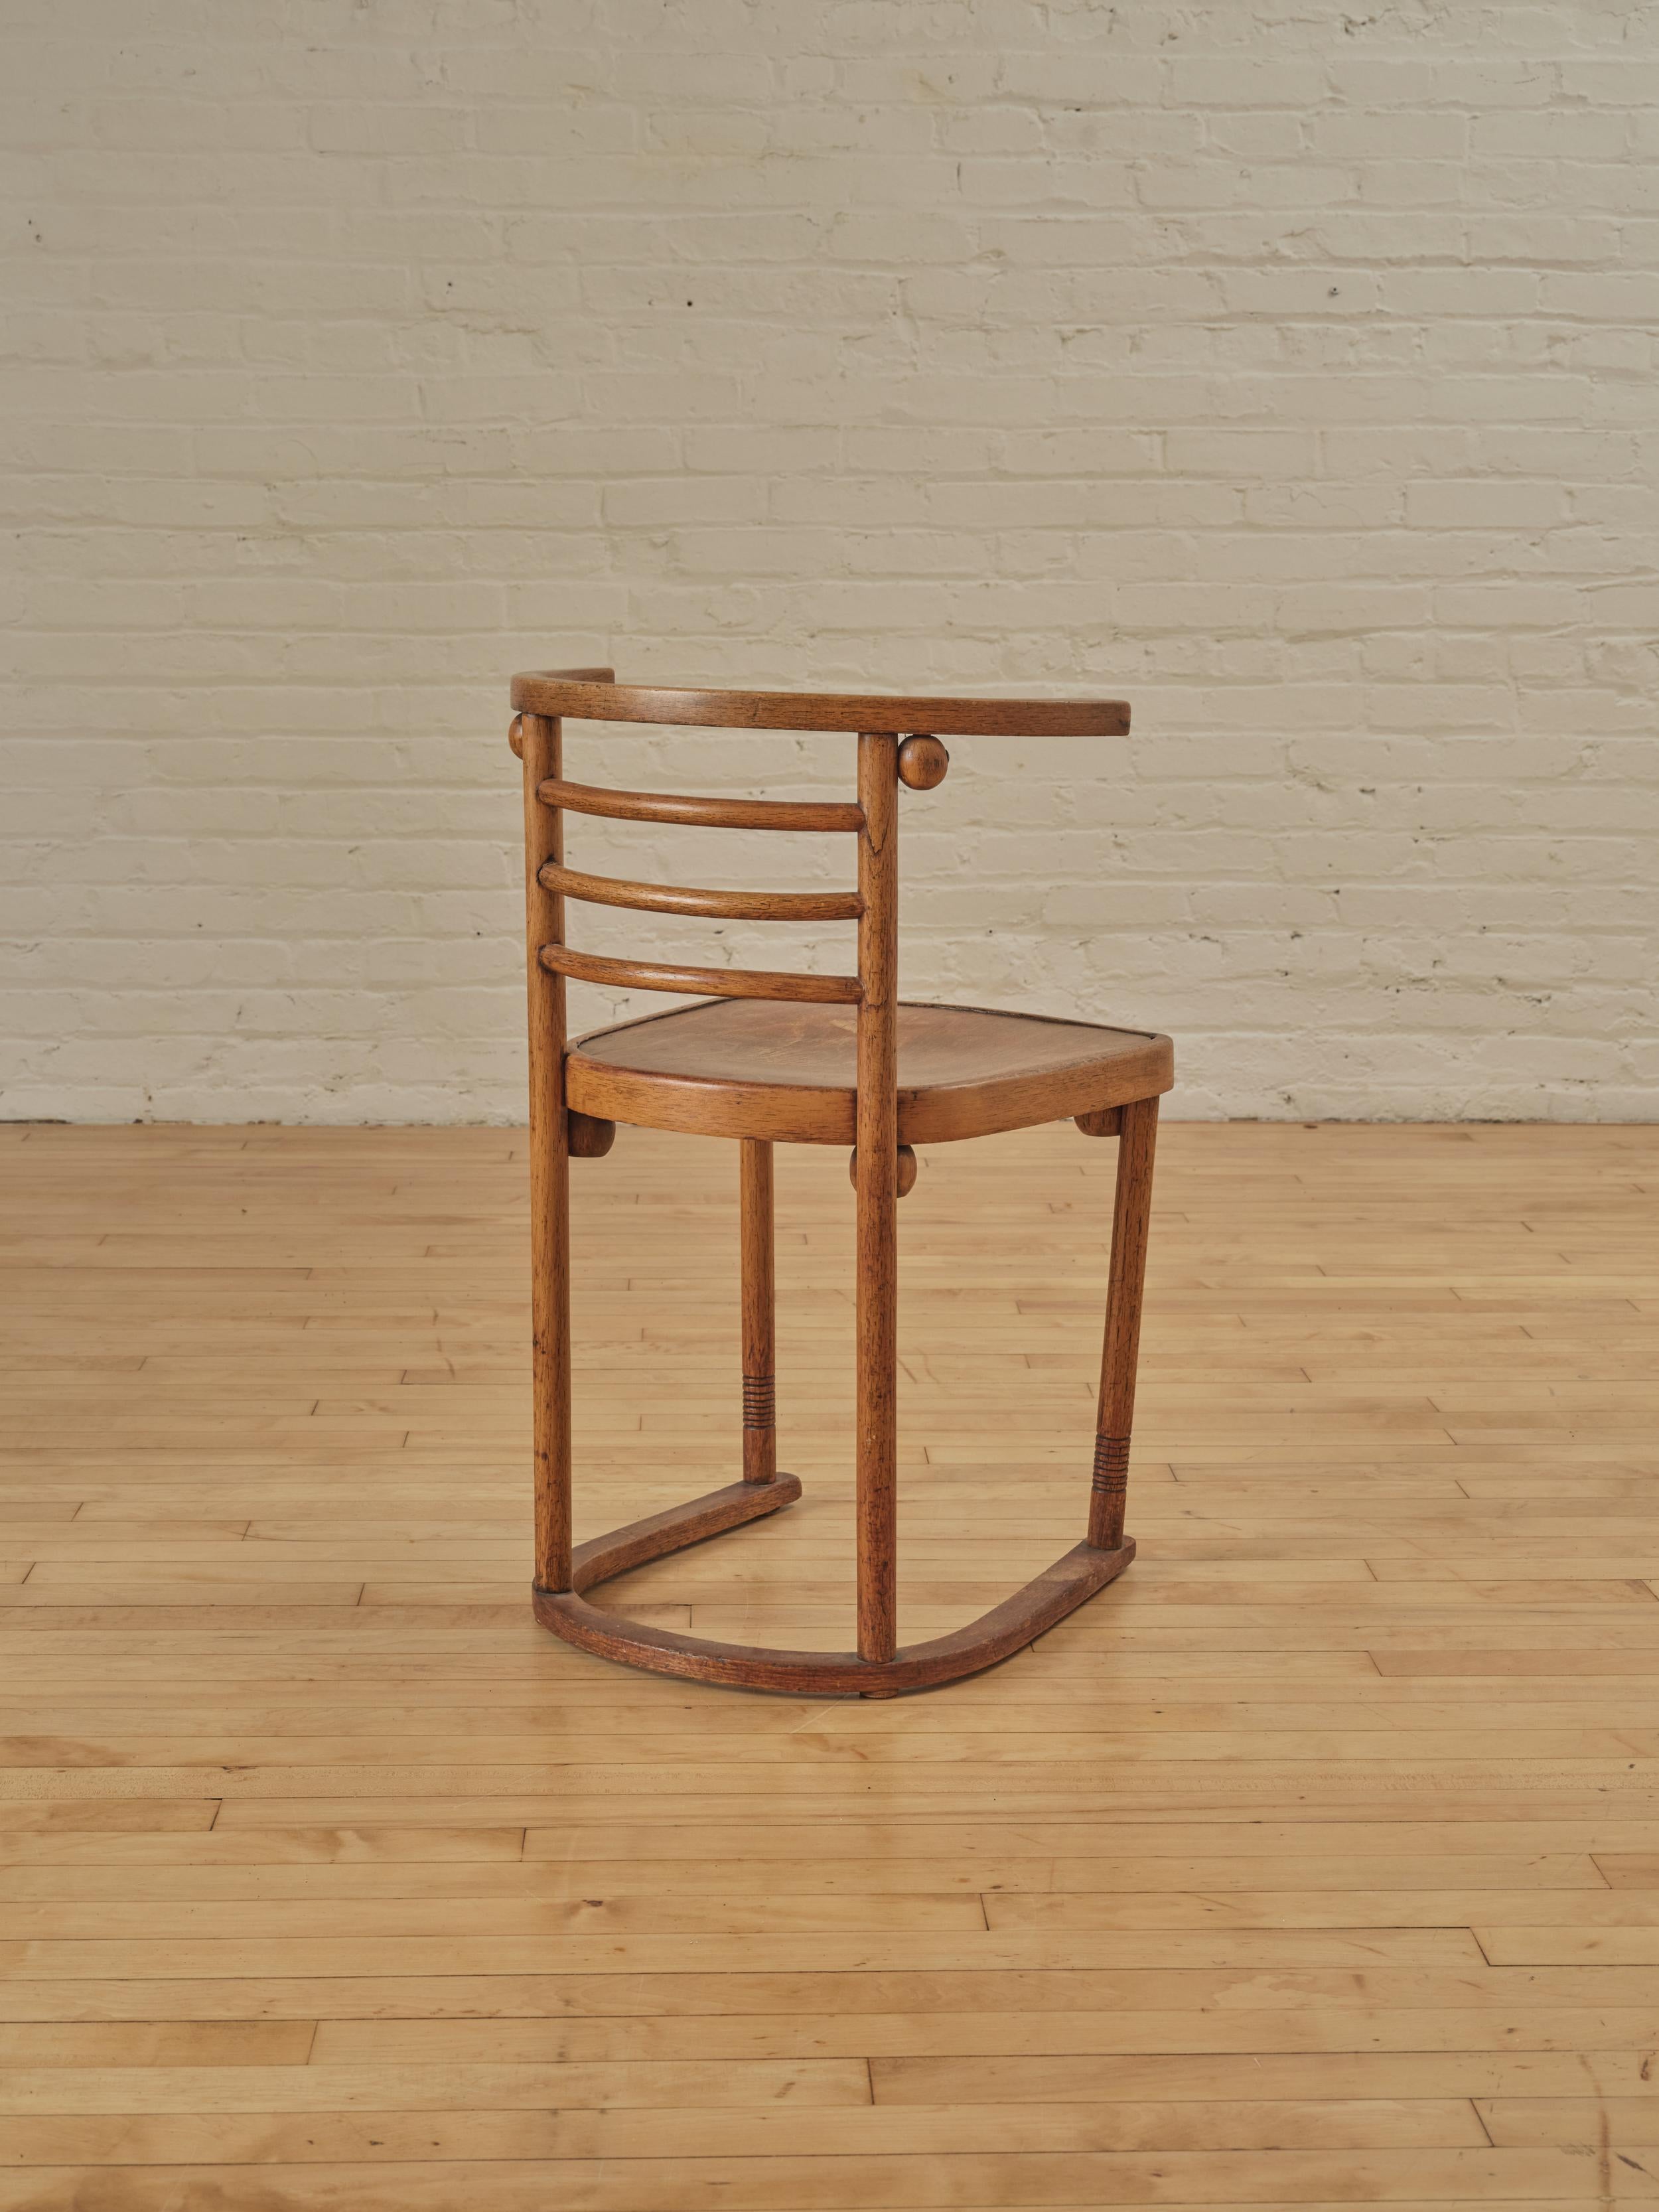 Fledermaus Chair by Josef Hoffman (Model 728) In Good Condition For Sale In Long Island City, NY